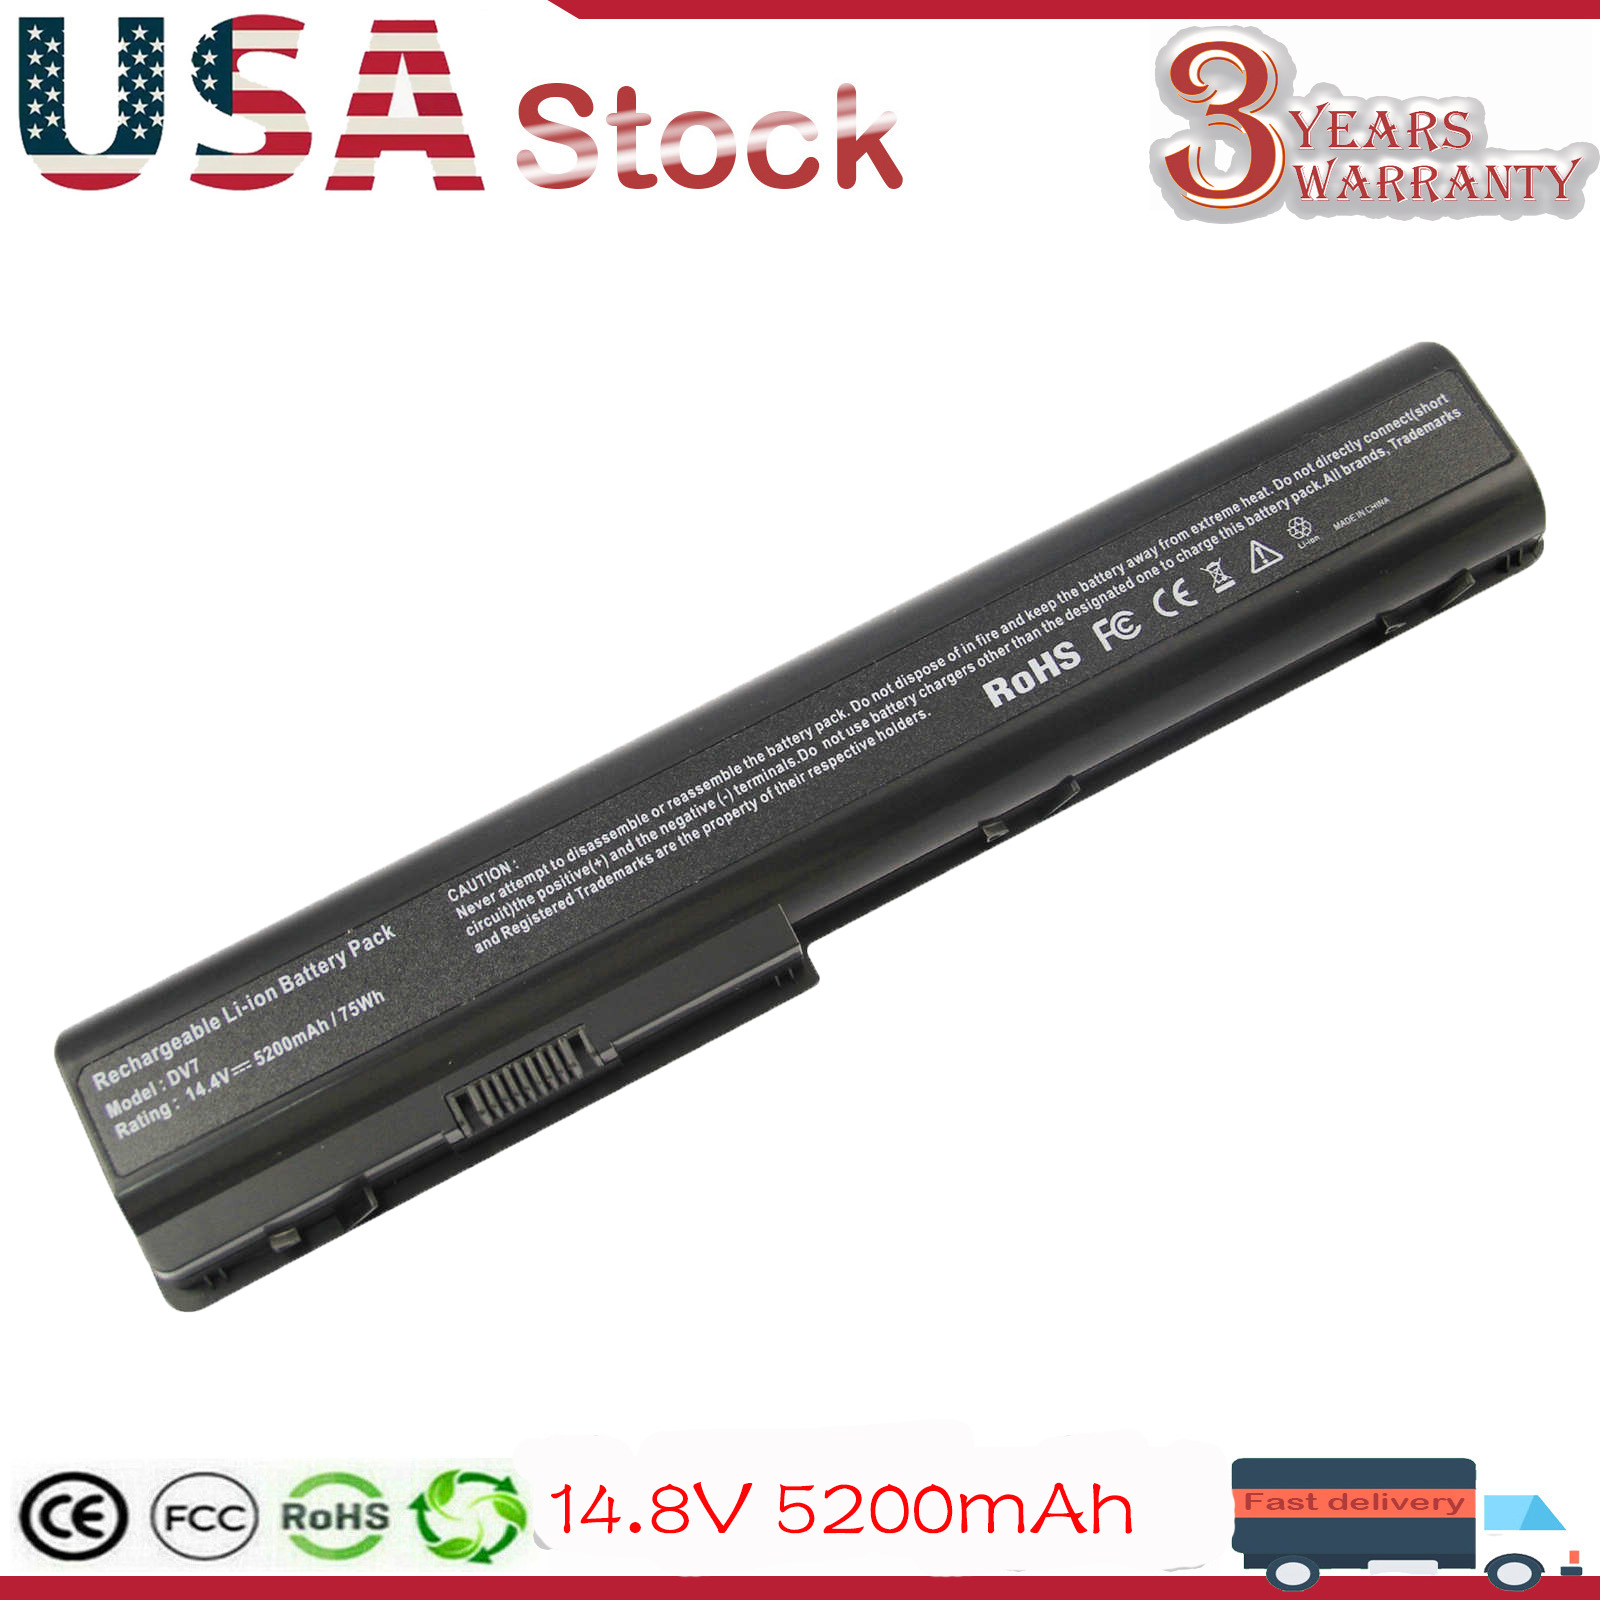 Battery for HP Pavillion DV7 Replace Spare Number 480385-001 HSTNN-DB75 5200mAh 